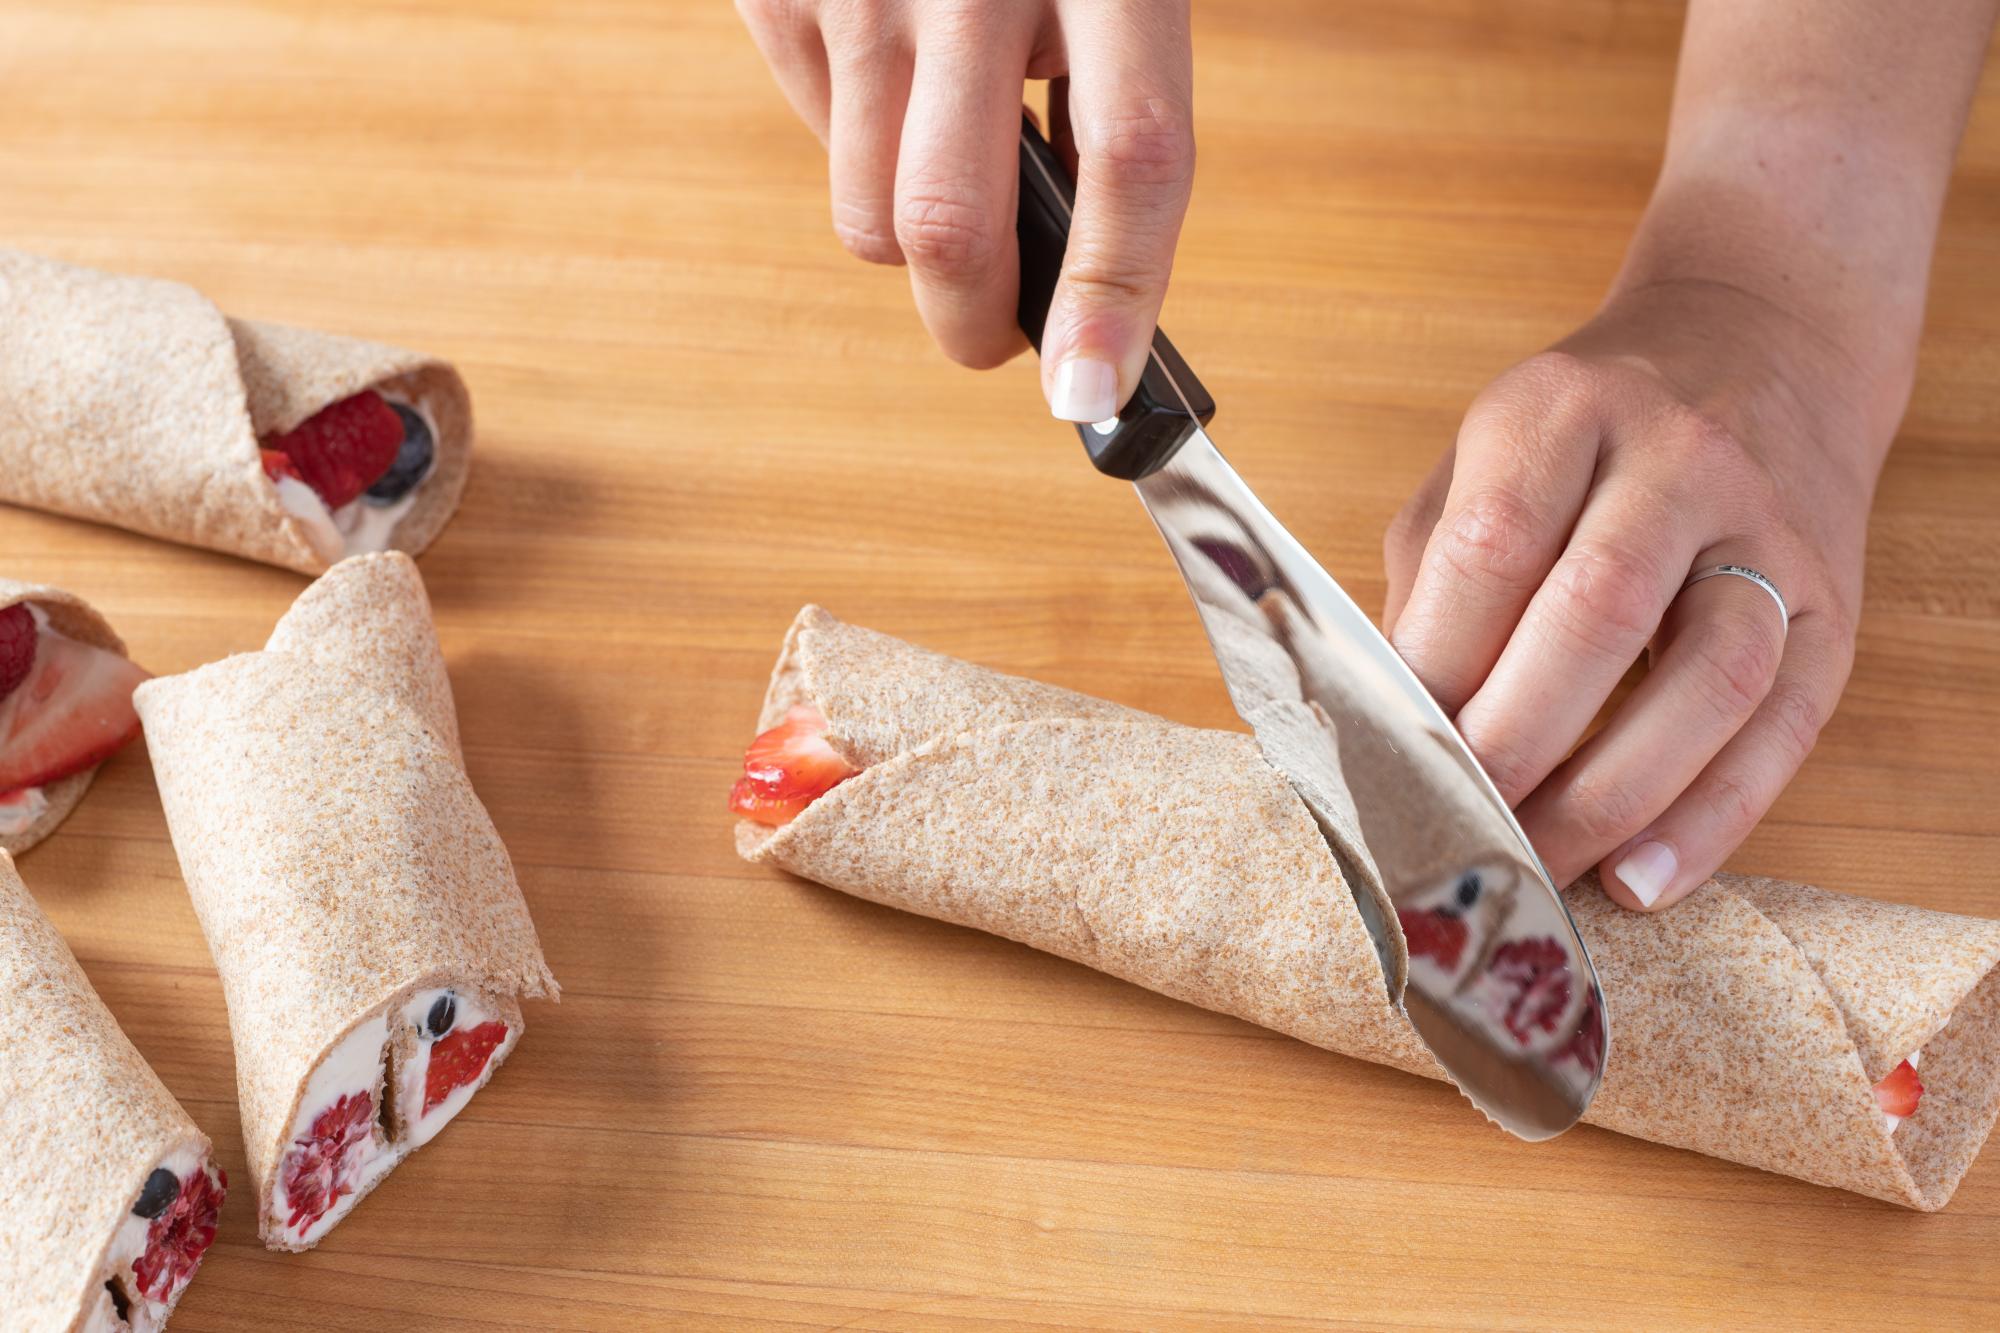 You can use the Spatula Spreader to cut the wraps in half.